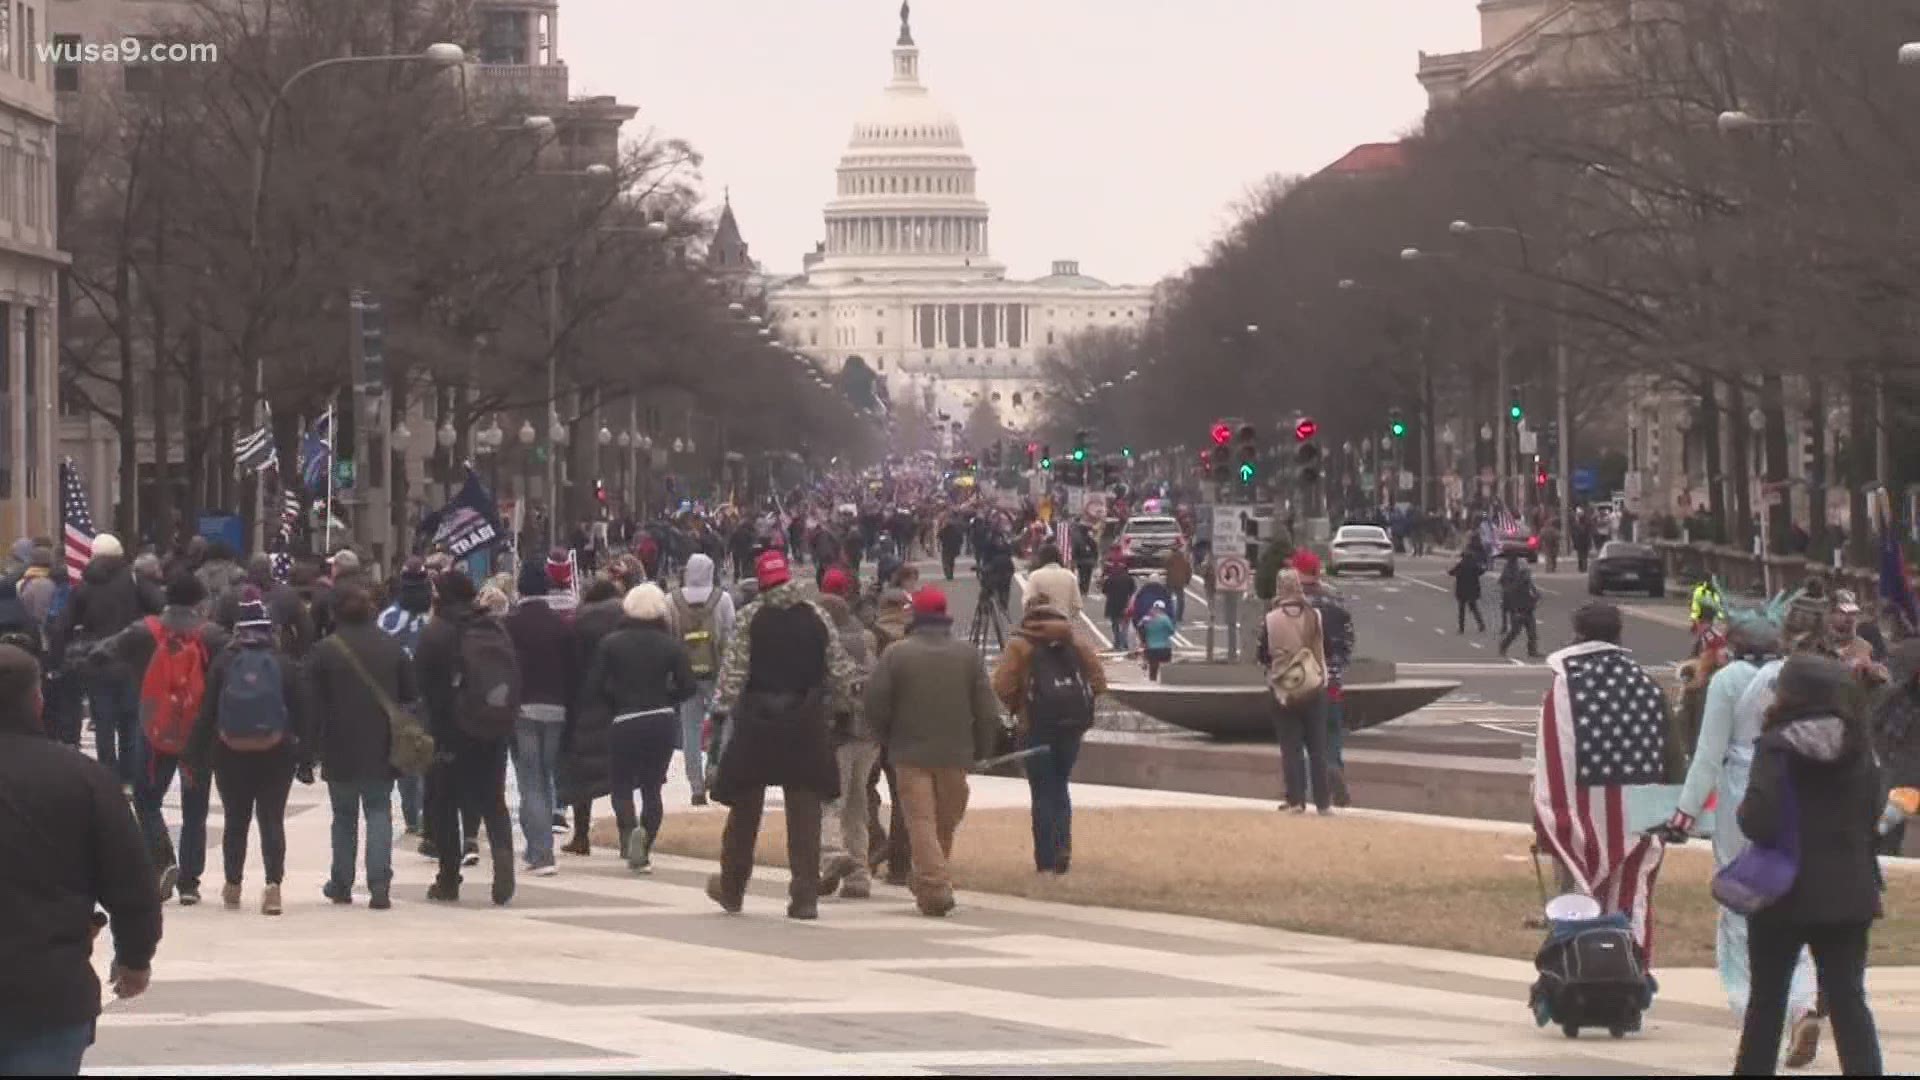 It took about 10 minutes from when the mob breached police gates at the Capitol for rioters to forcefully enter the building. 34 minutes later, a woman was shot.